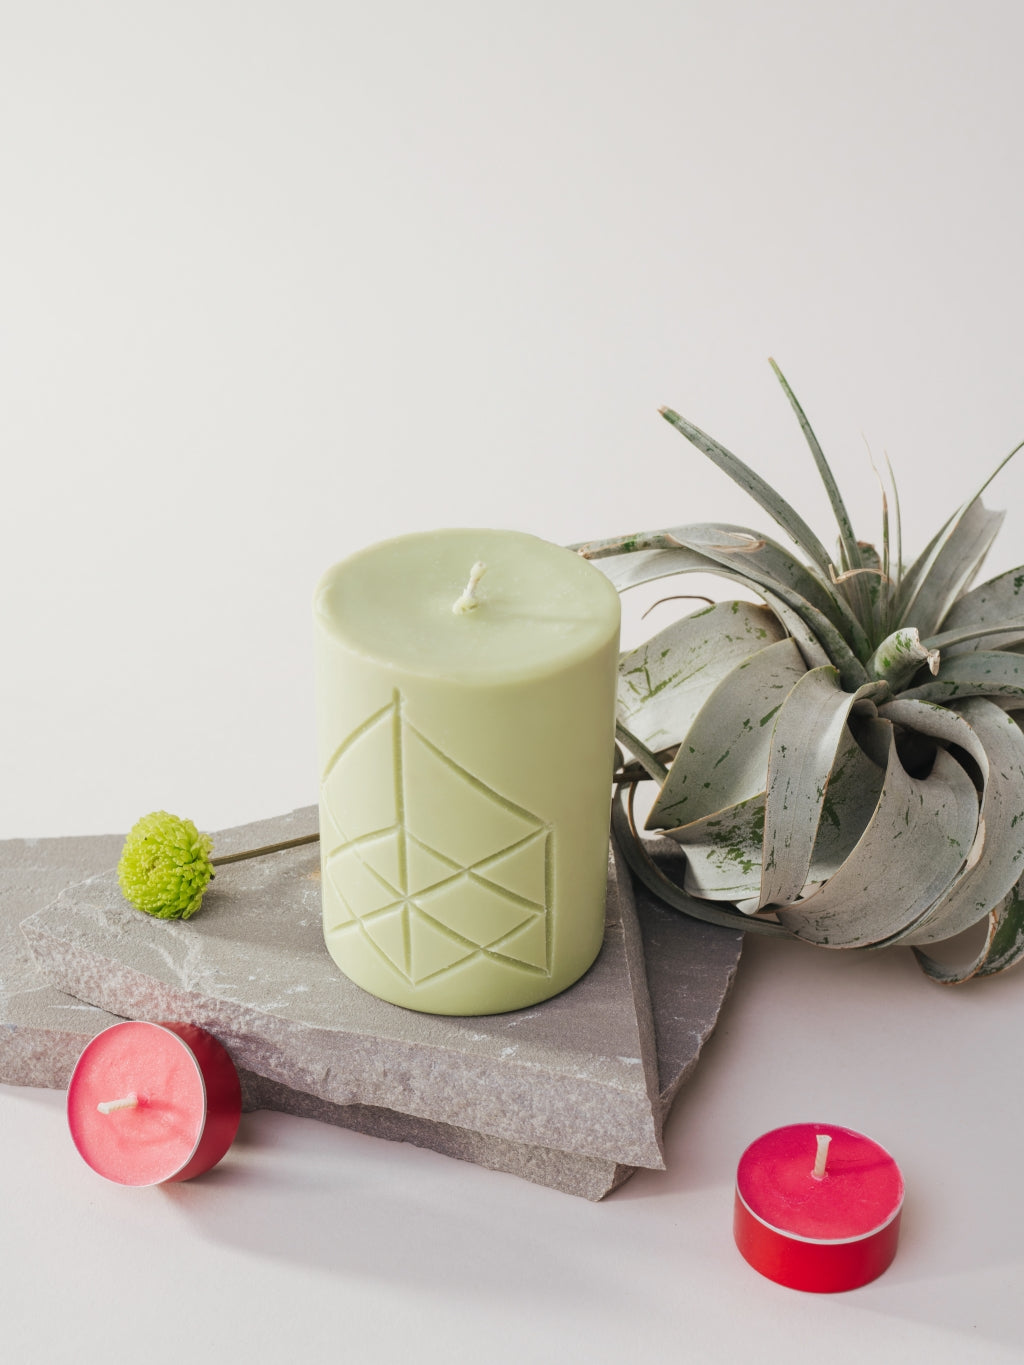 Smells Like Spells Scented Tealight Candles FREYA | Inspiration Her